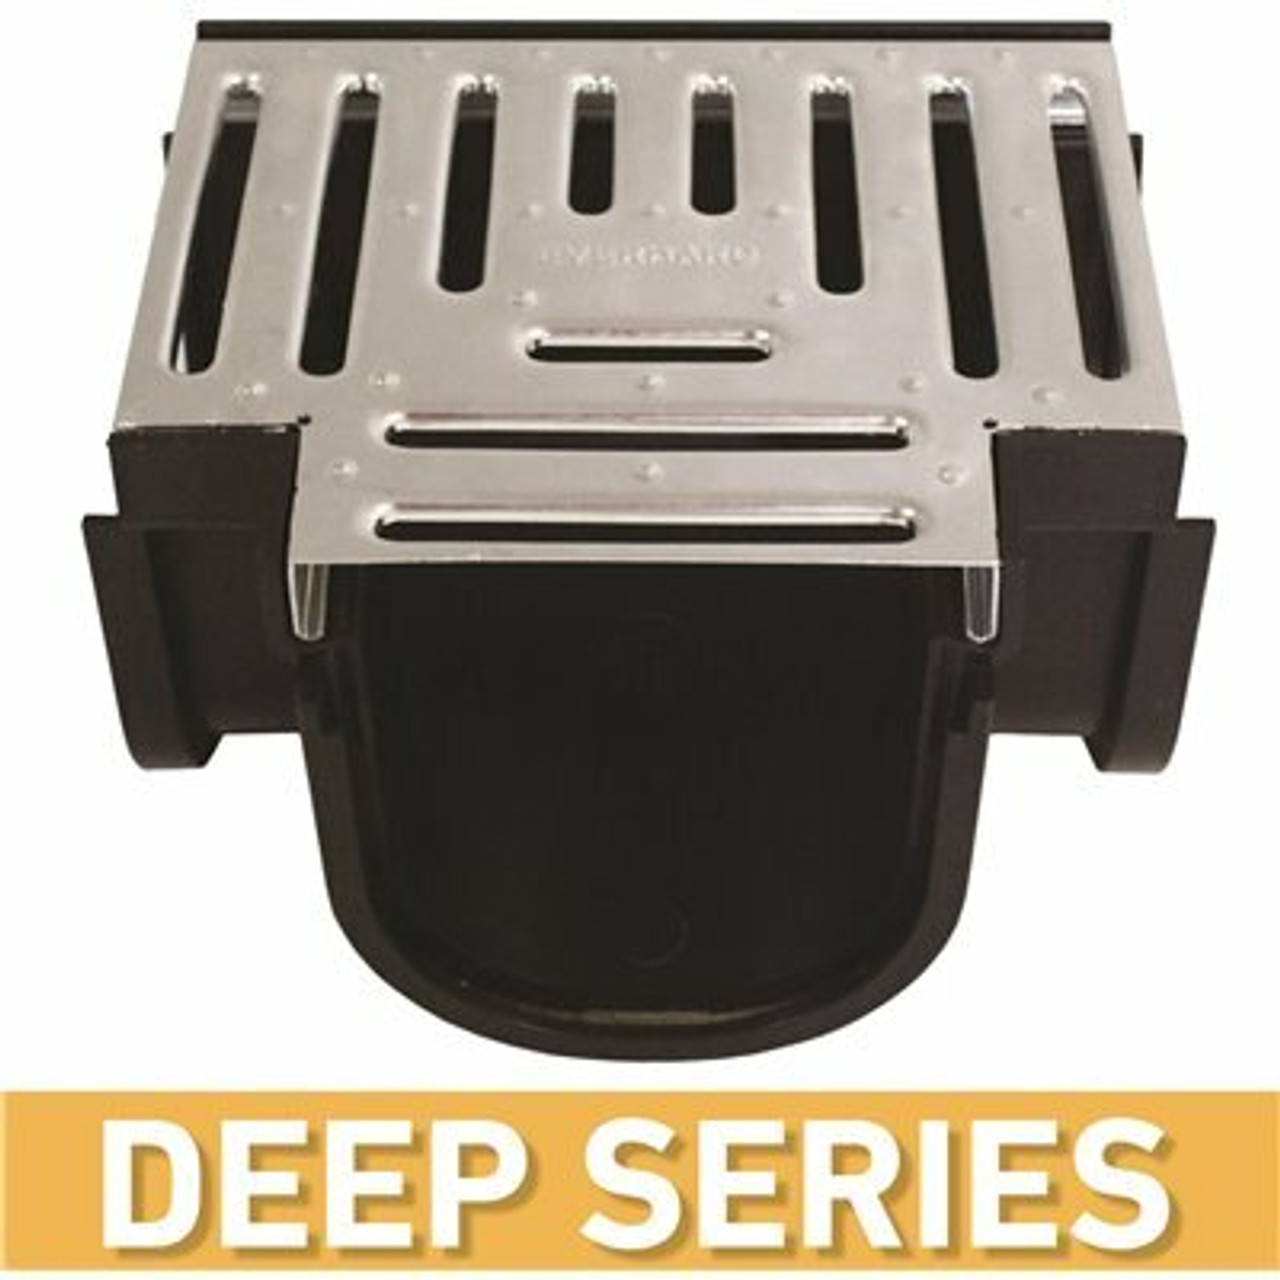 U.S. Trench Drain Deep Series Tee For 5.4 In. Trench And Channel Drain Systems W/ Galvanized Steel Grate